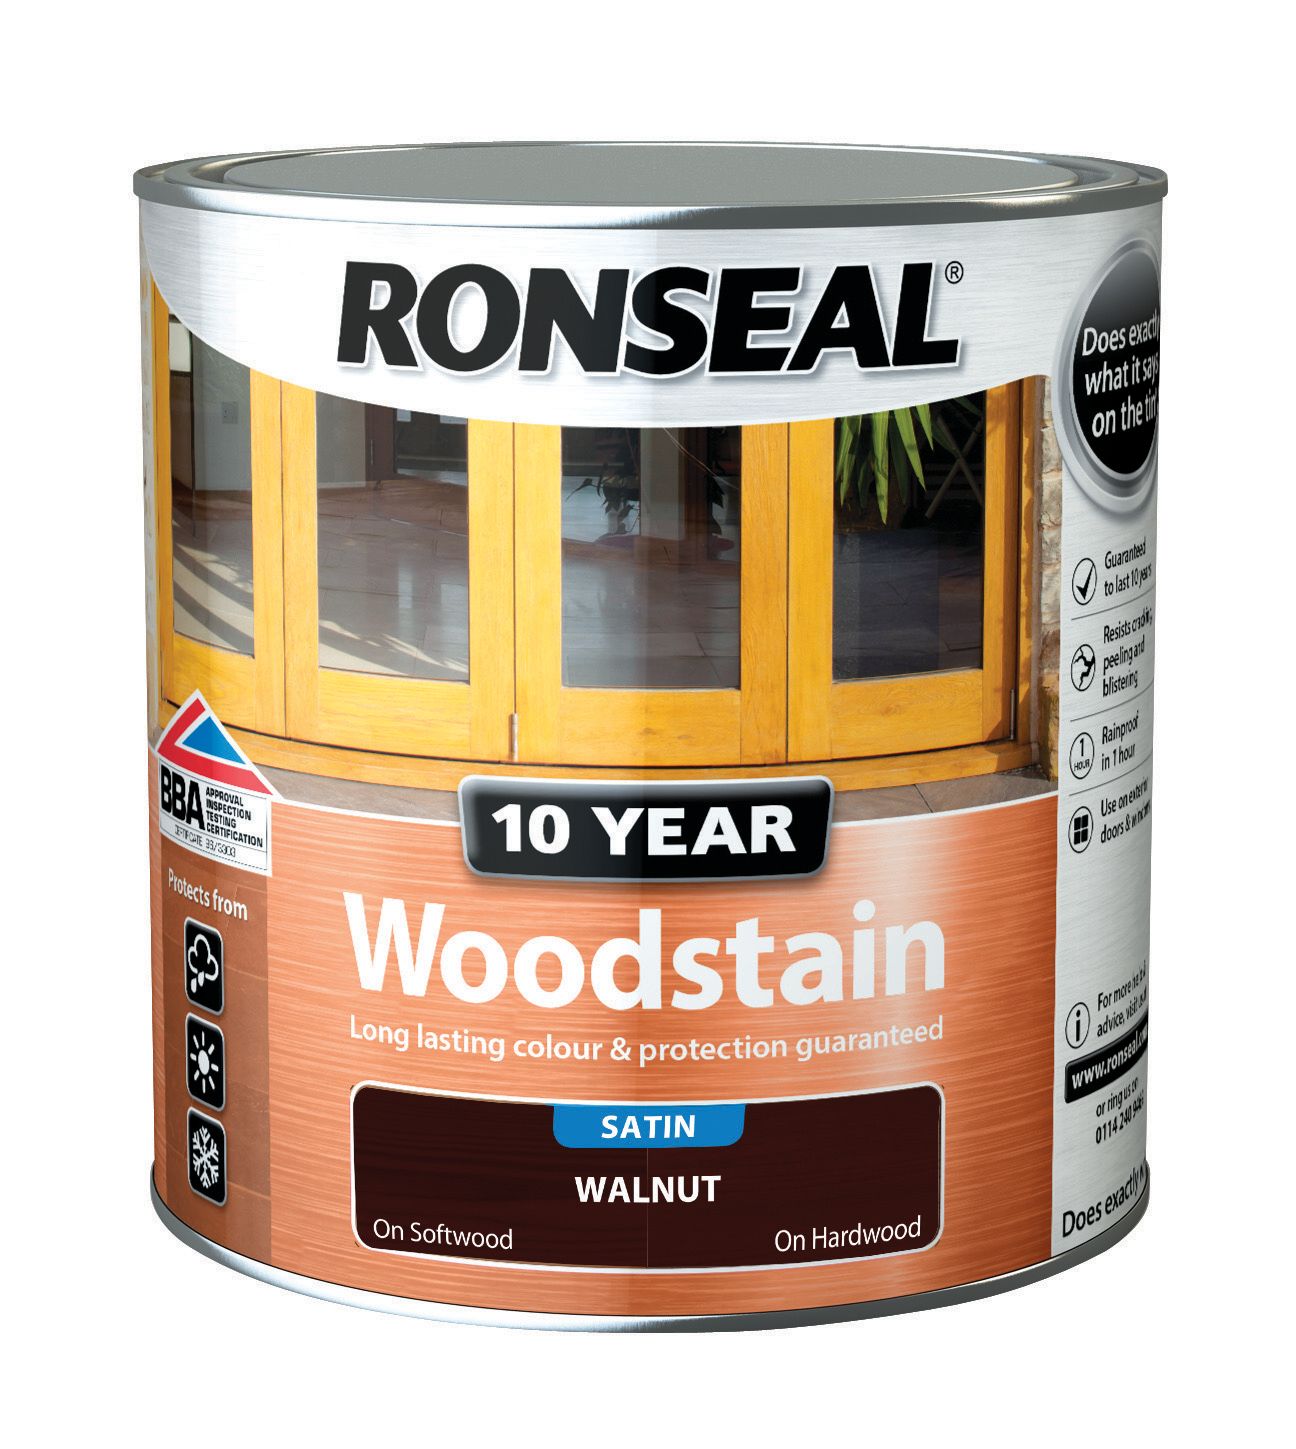 Image of Ronseal 10 Year Woodstain - Walnut 2.5L